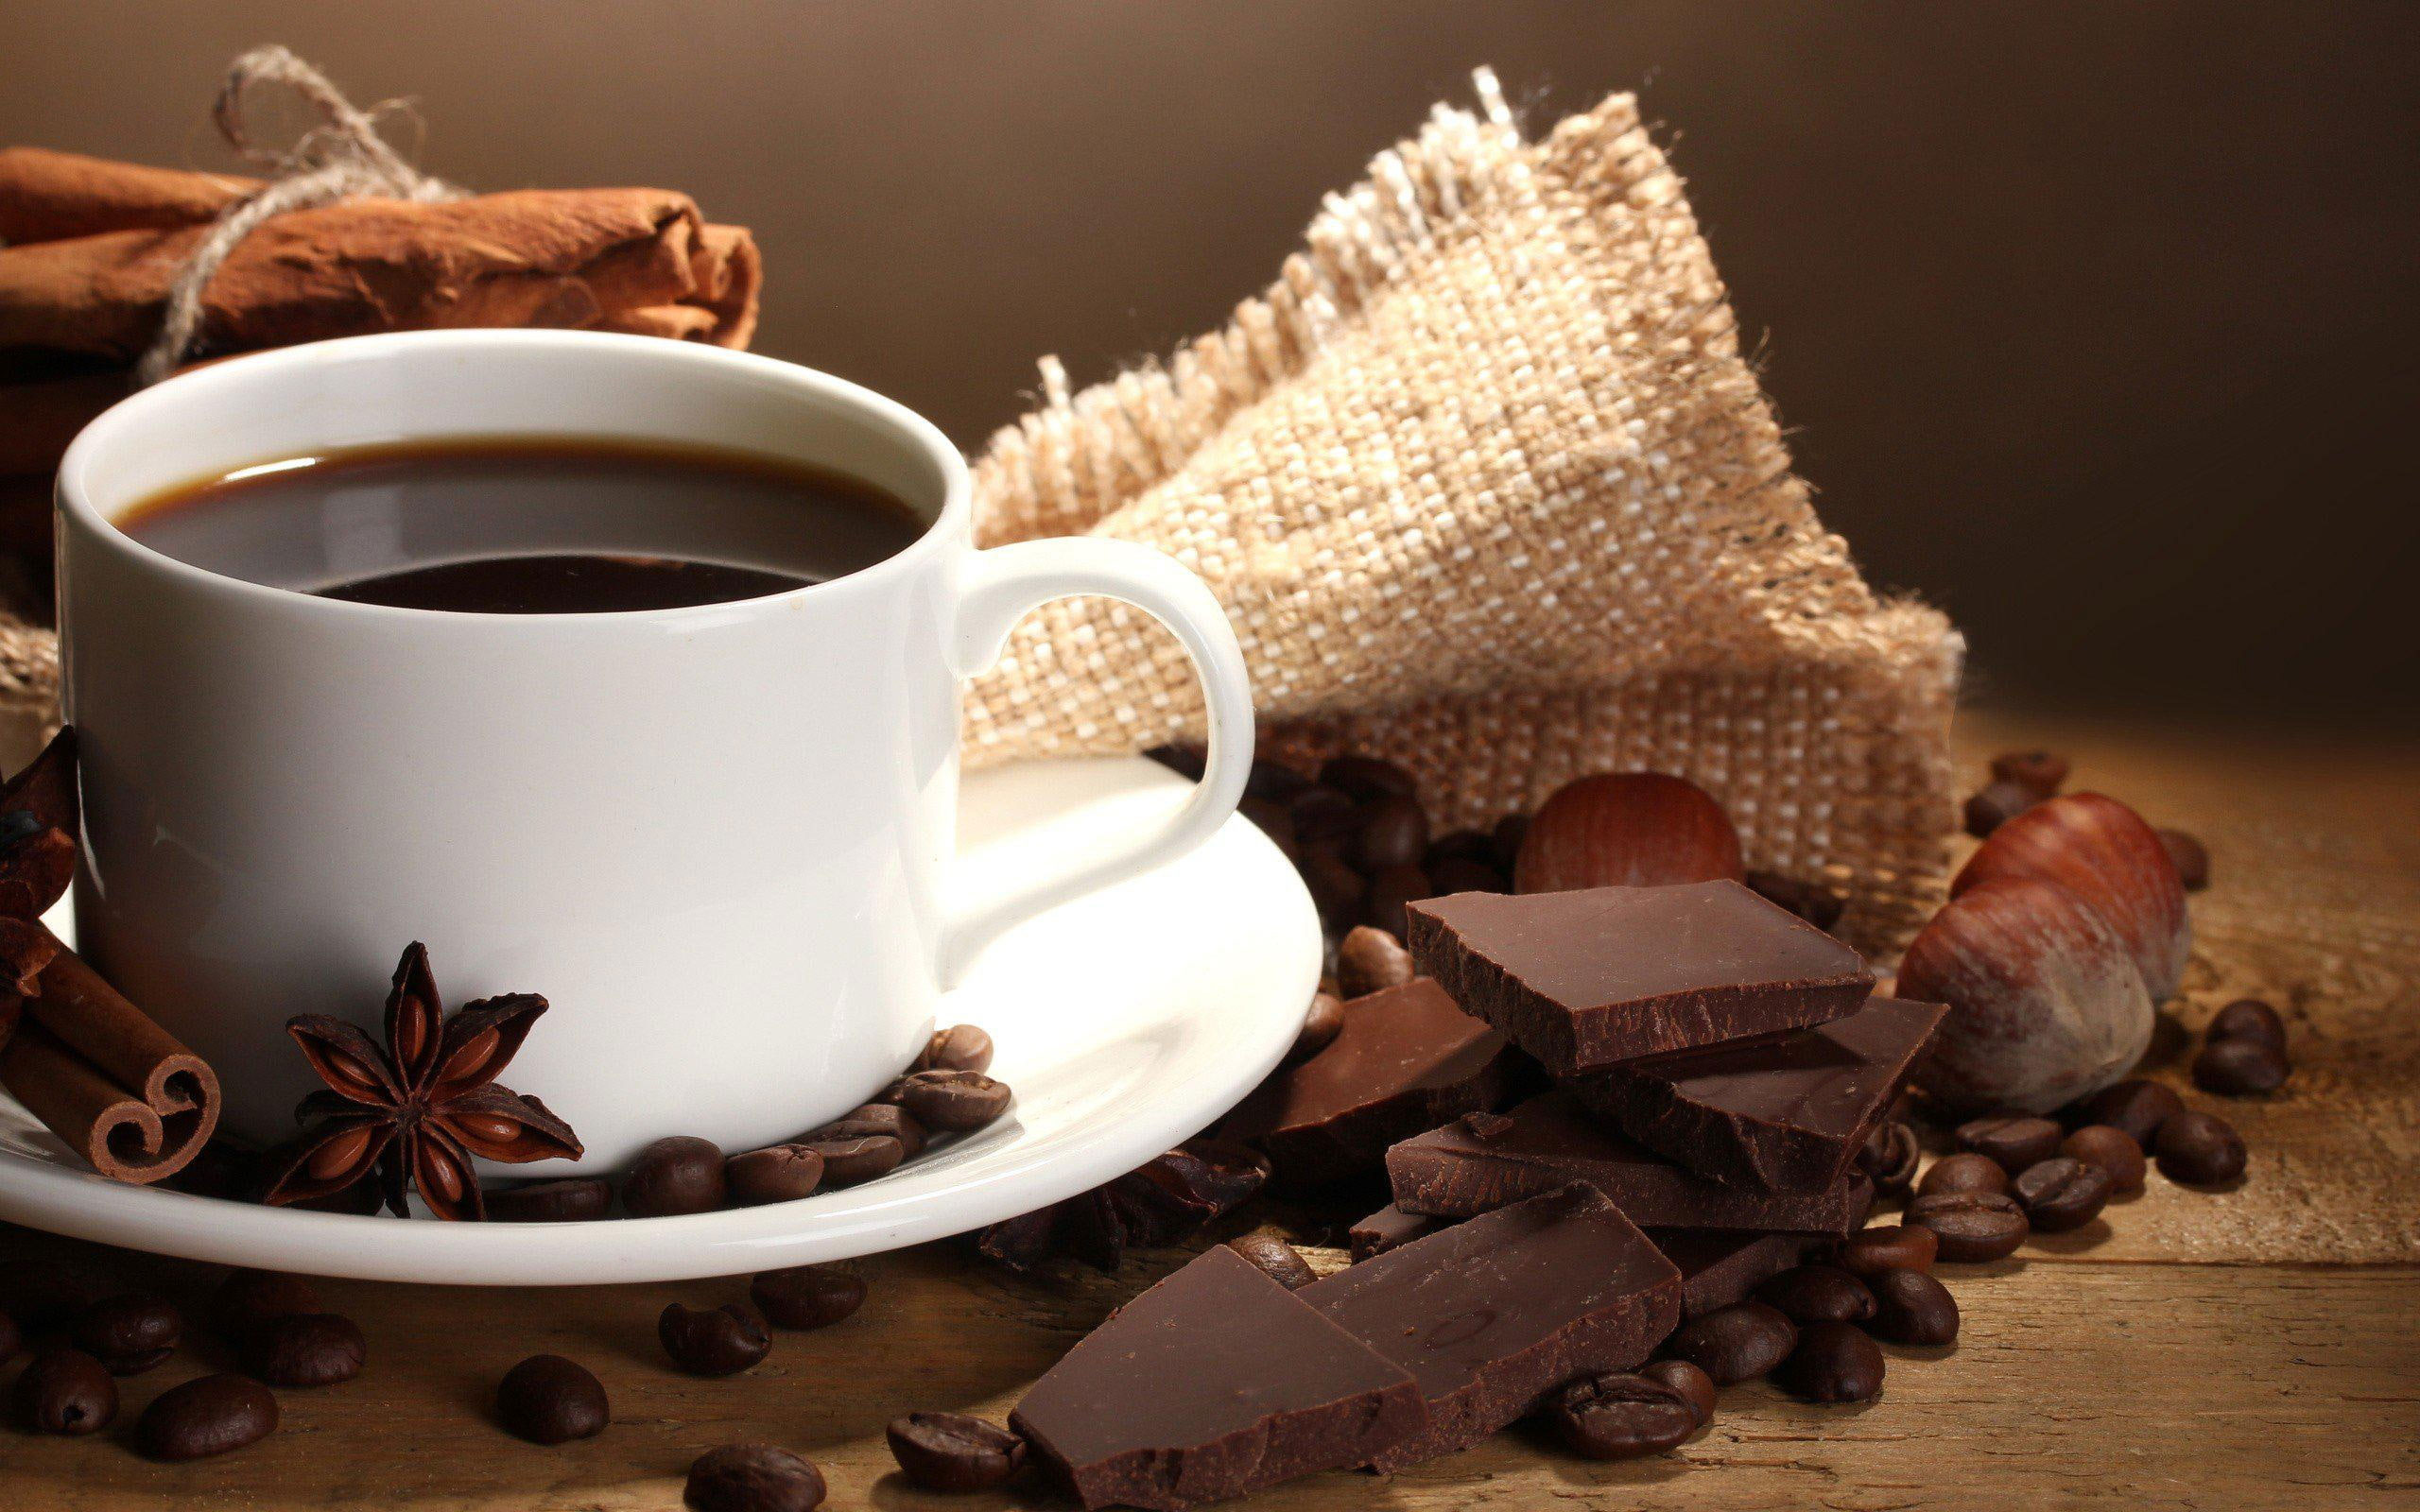 Coffee Chocolate Food Cups Beans wallpaper, drinks